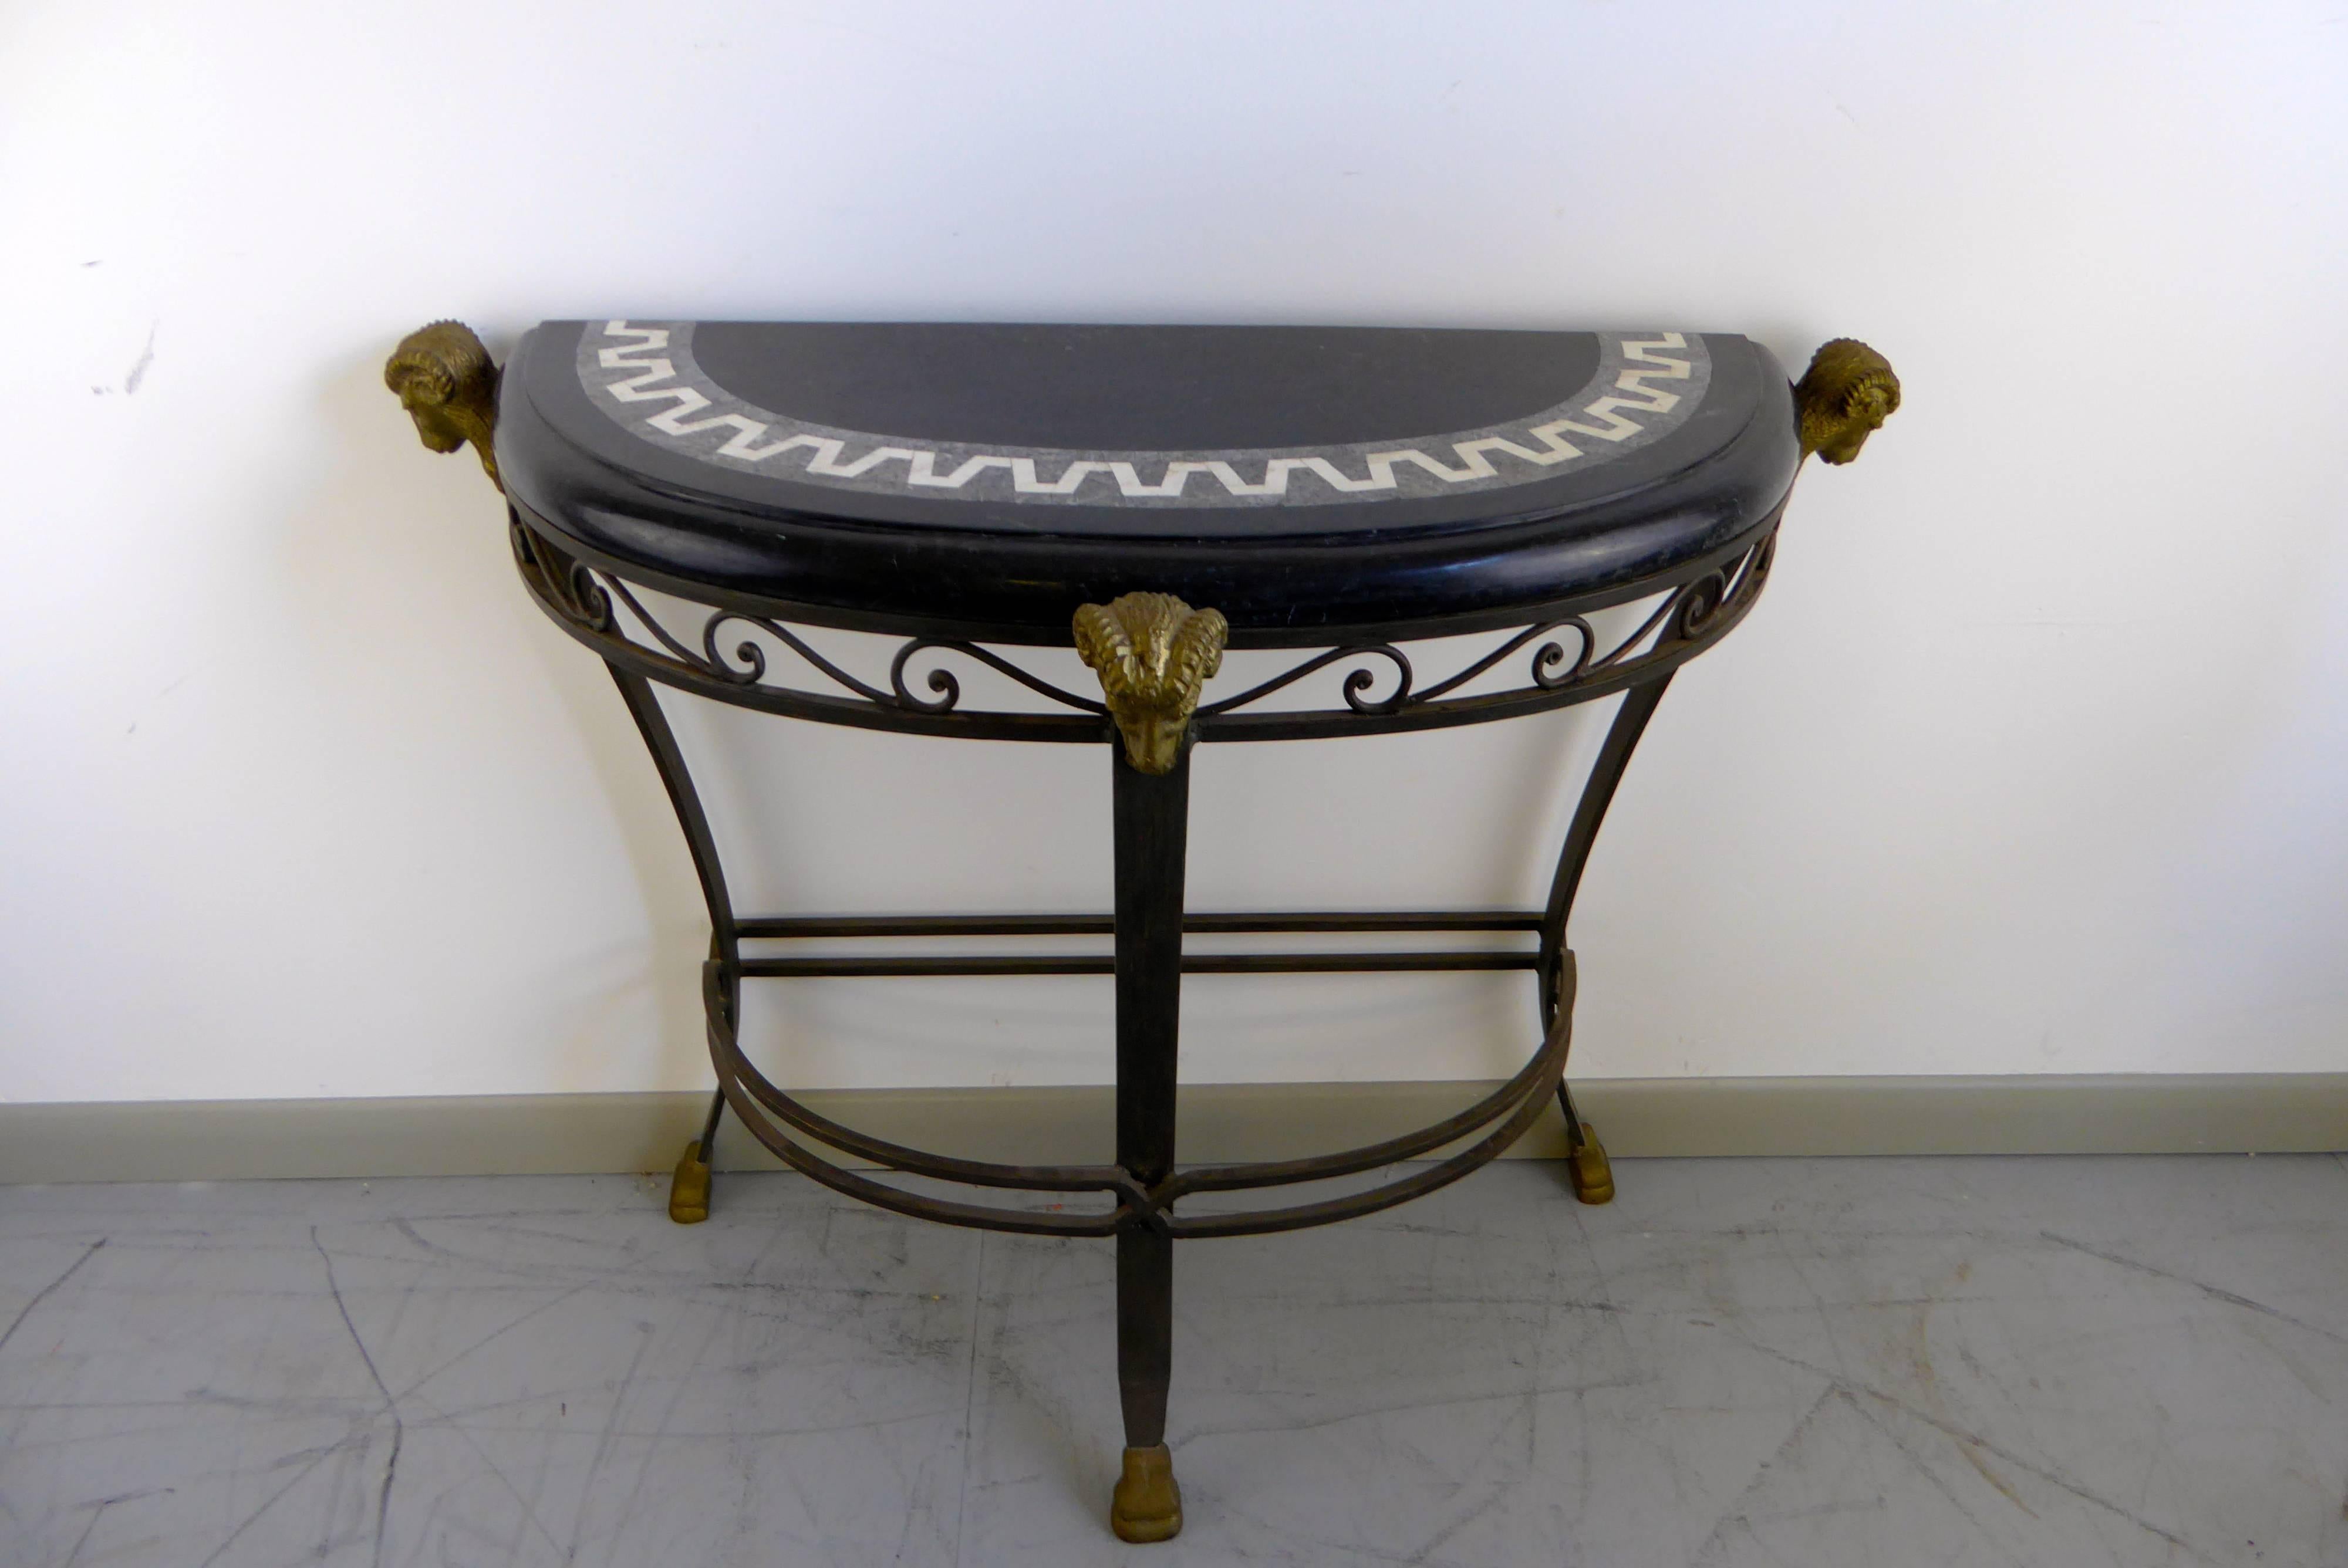 Stunning vintage demilune iron console table featuring a tessellated marble top and bronze ram's head accents attributed to Maitland Smith.